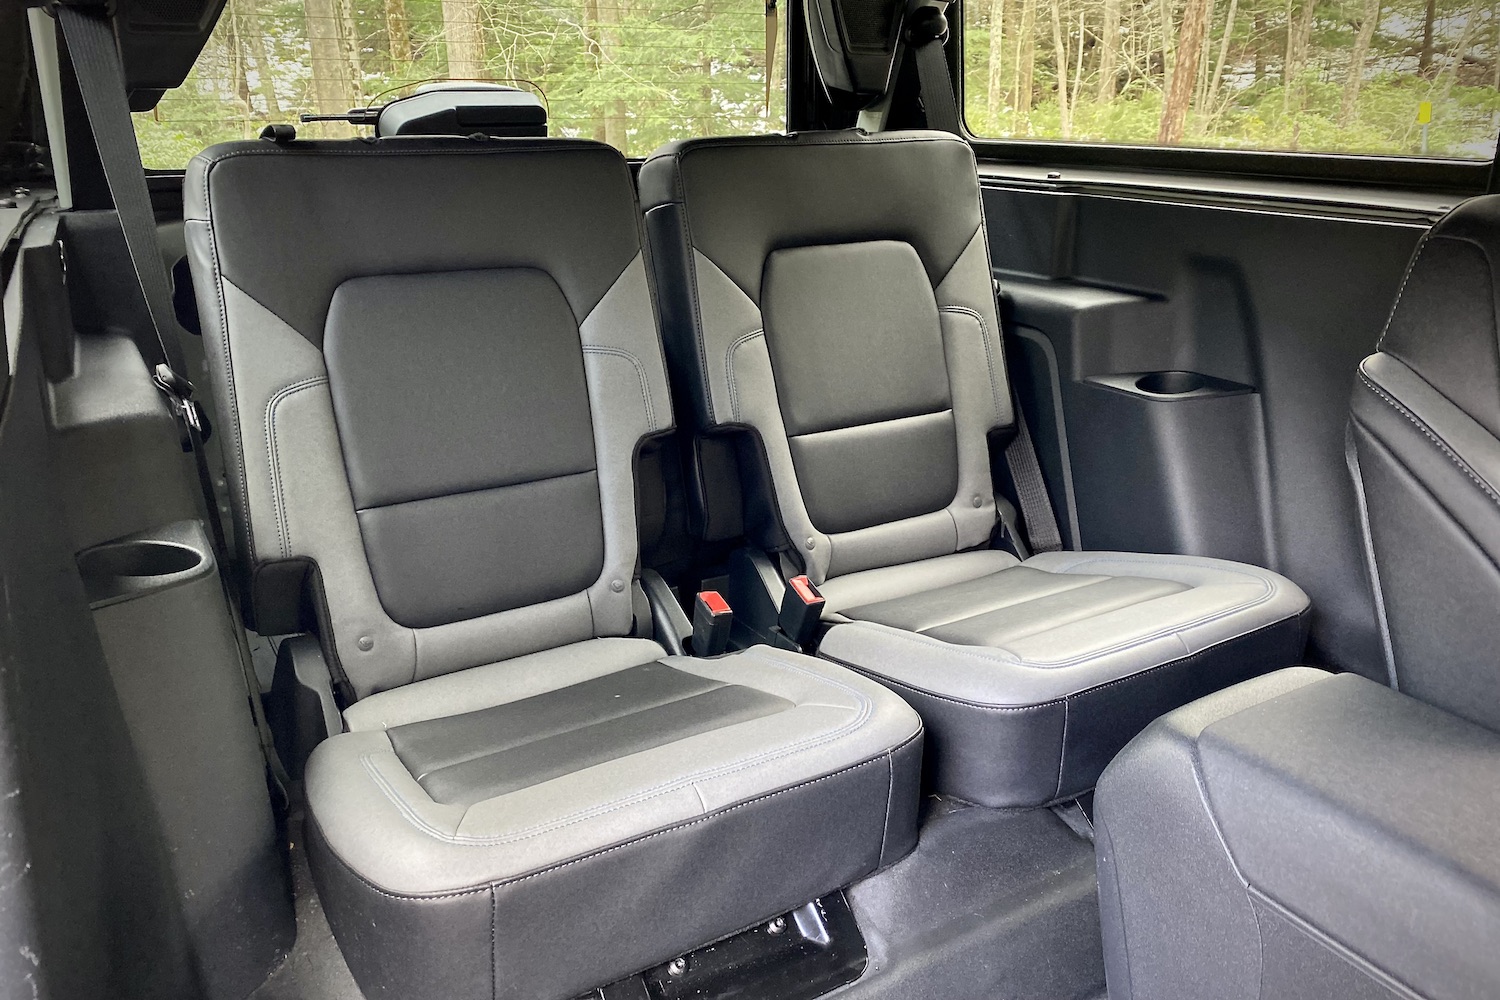 Rear seats in the 2021 Ford Bronco from passenger side outside of the car with trees in the back.